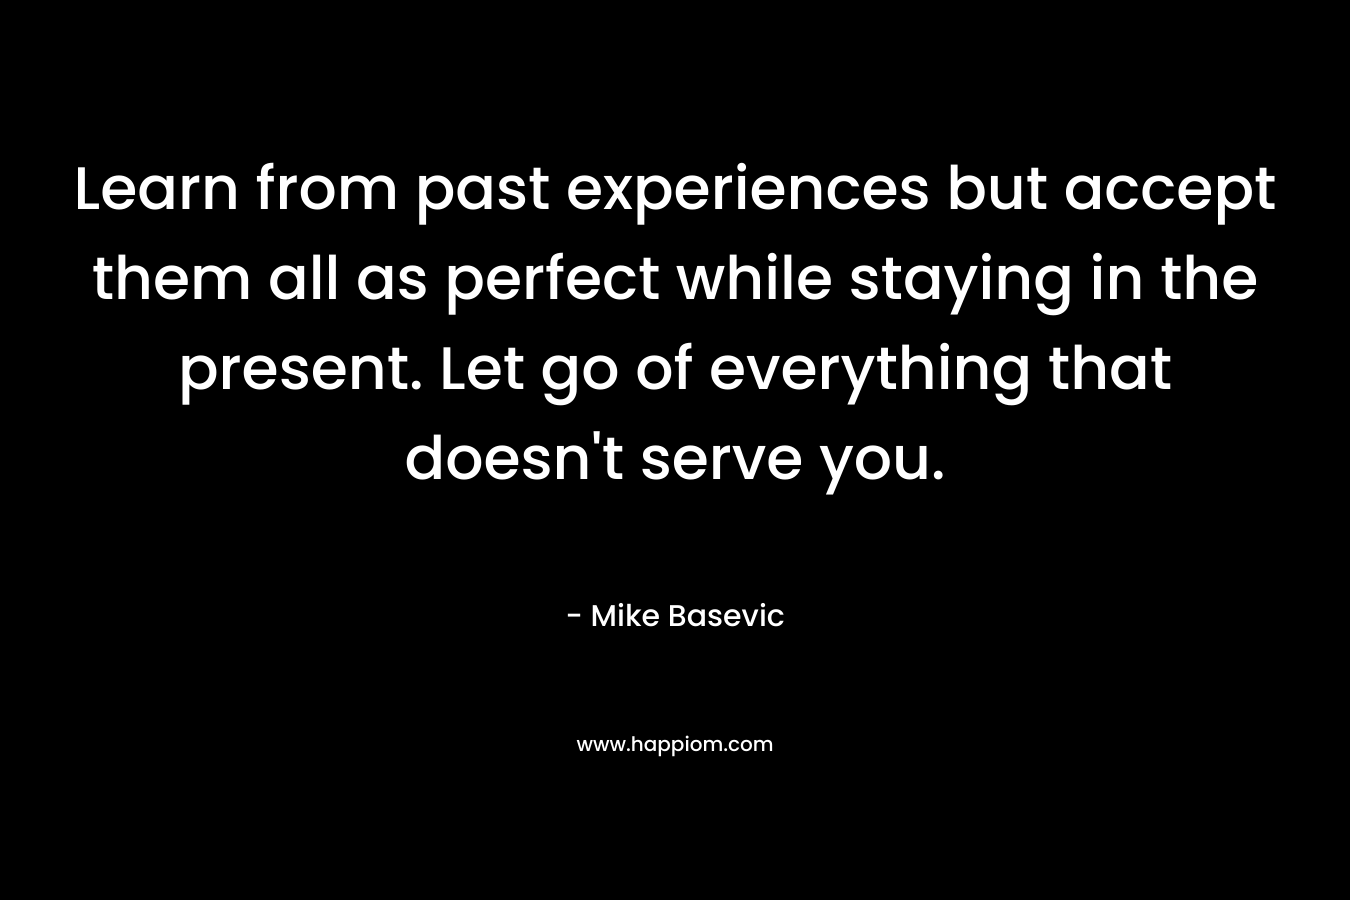 Learn from past experiences but accept them all as perfect while staying in the present. Let go of everything that doesn’t serve you. – Mike Basevic